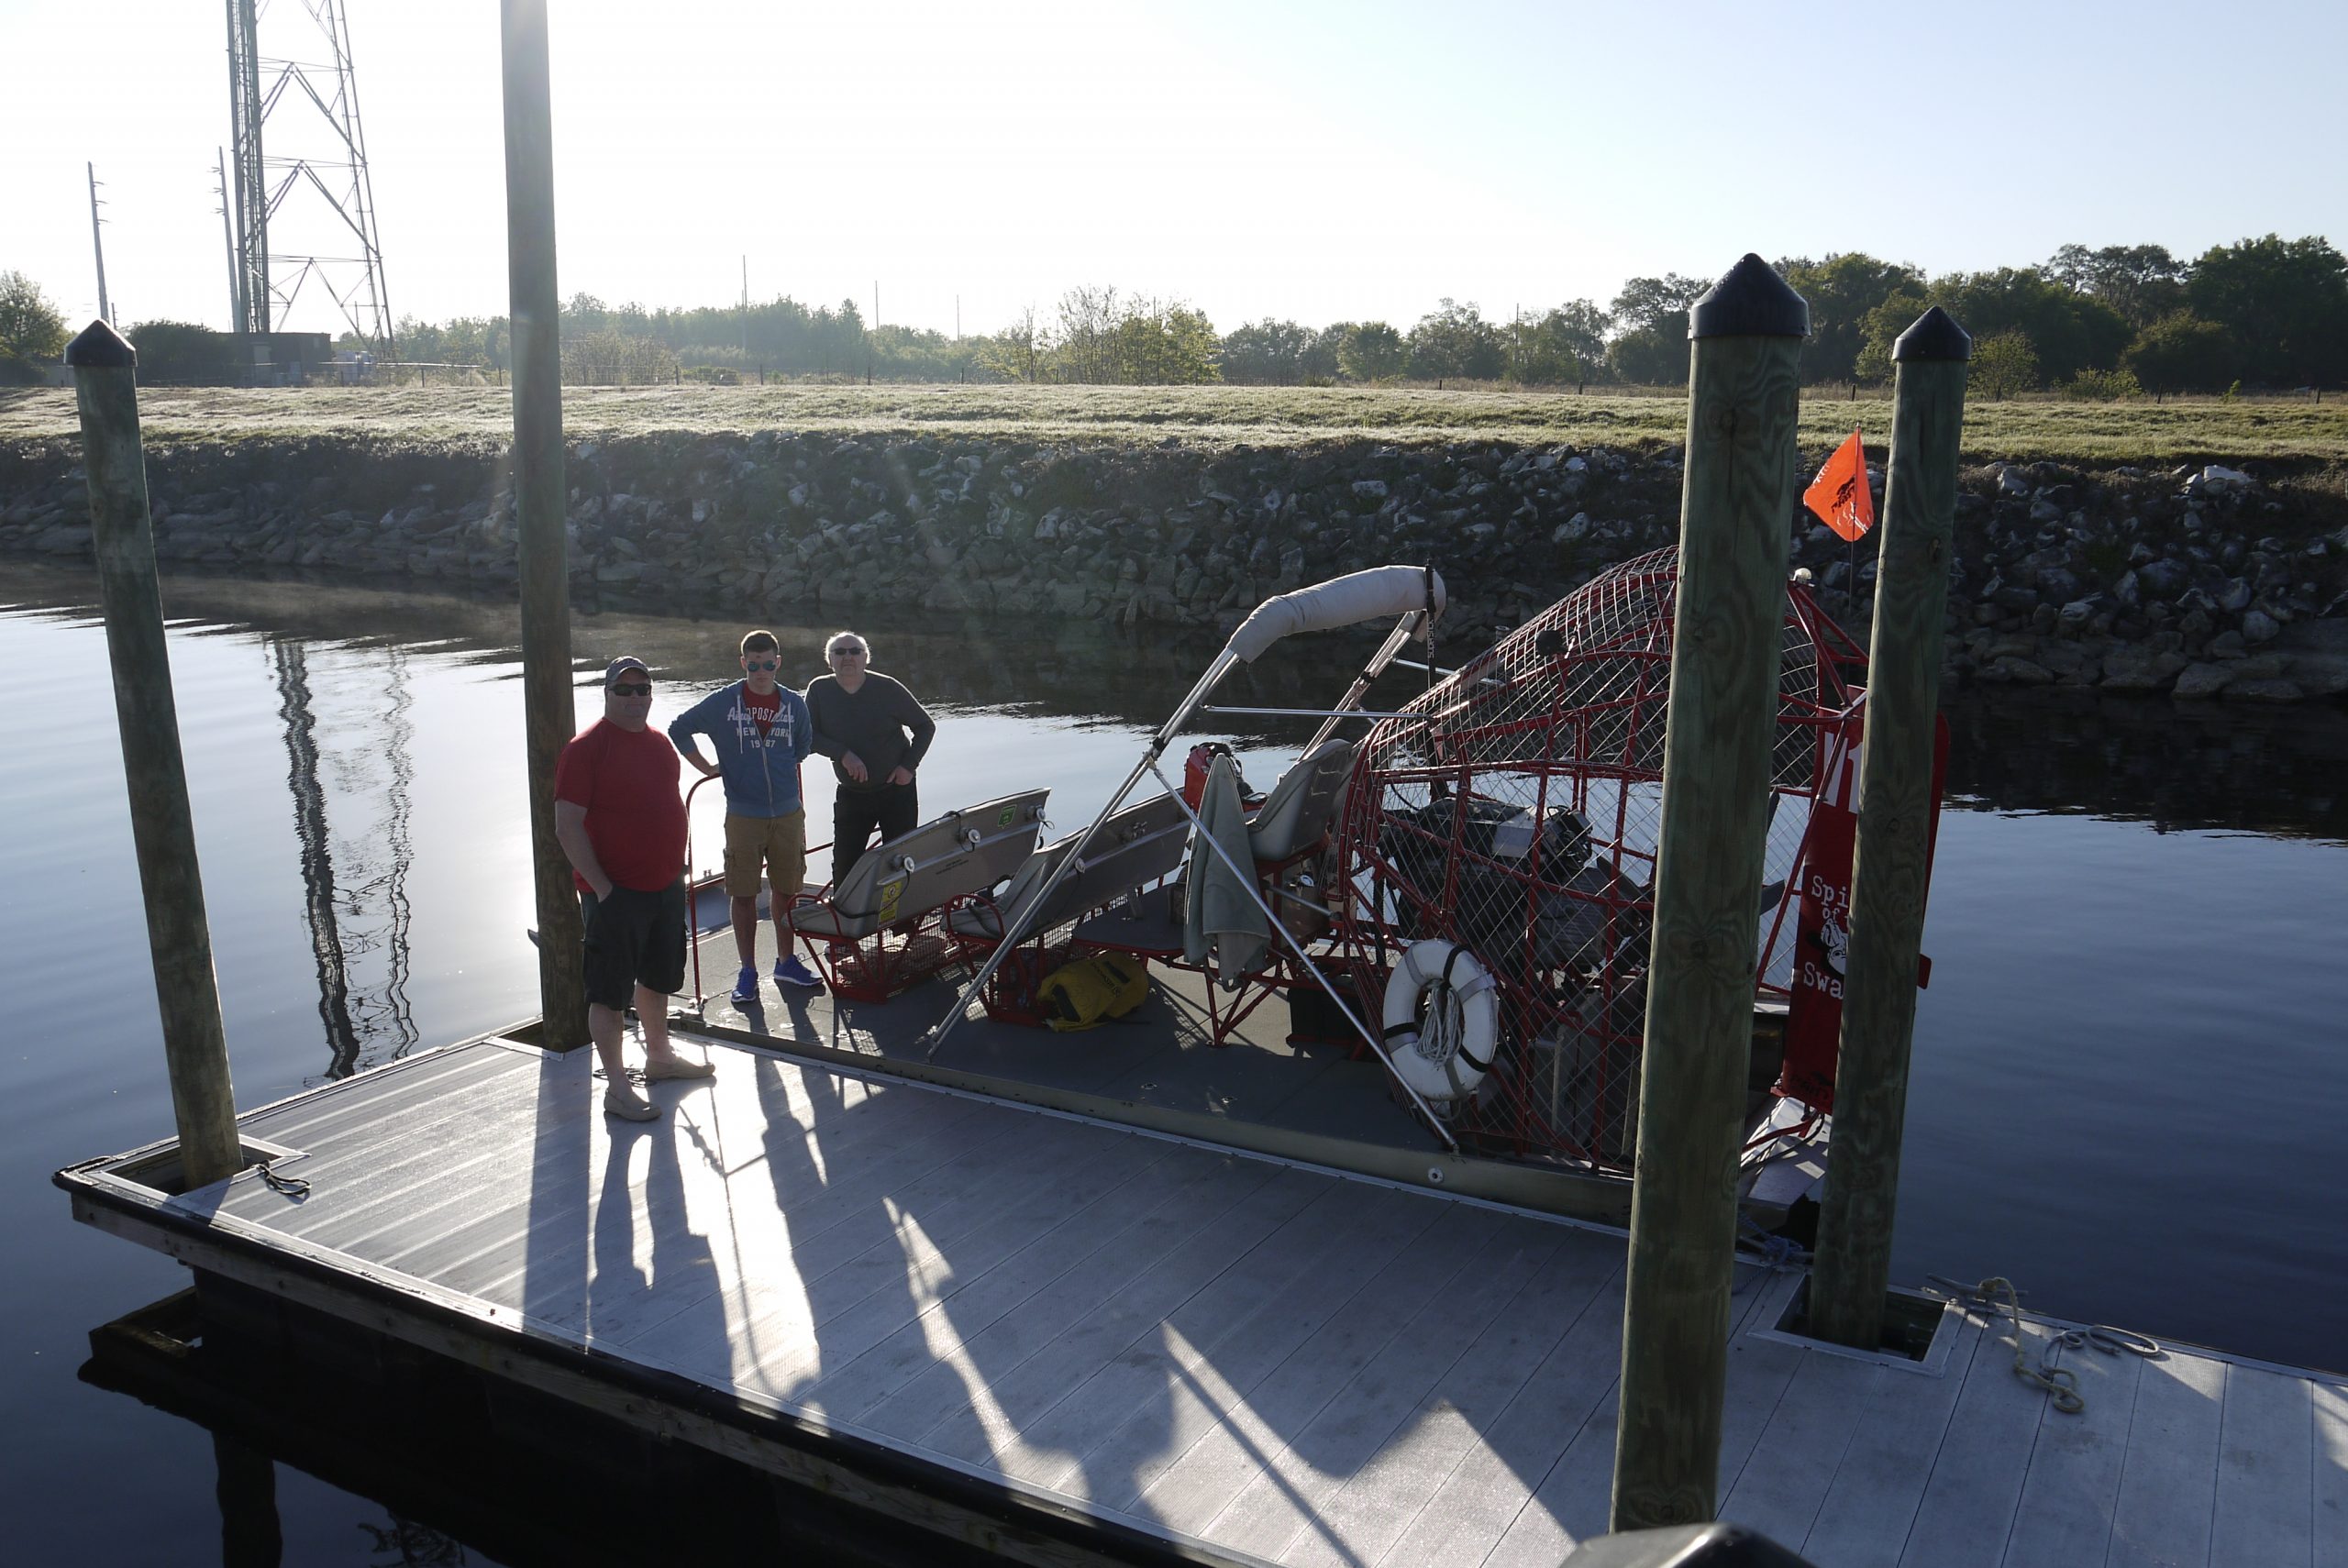 Orlando Airboats – Spirit of the Swamp Airboats